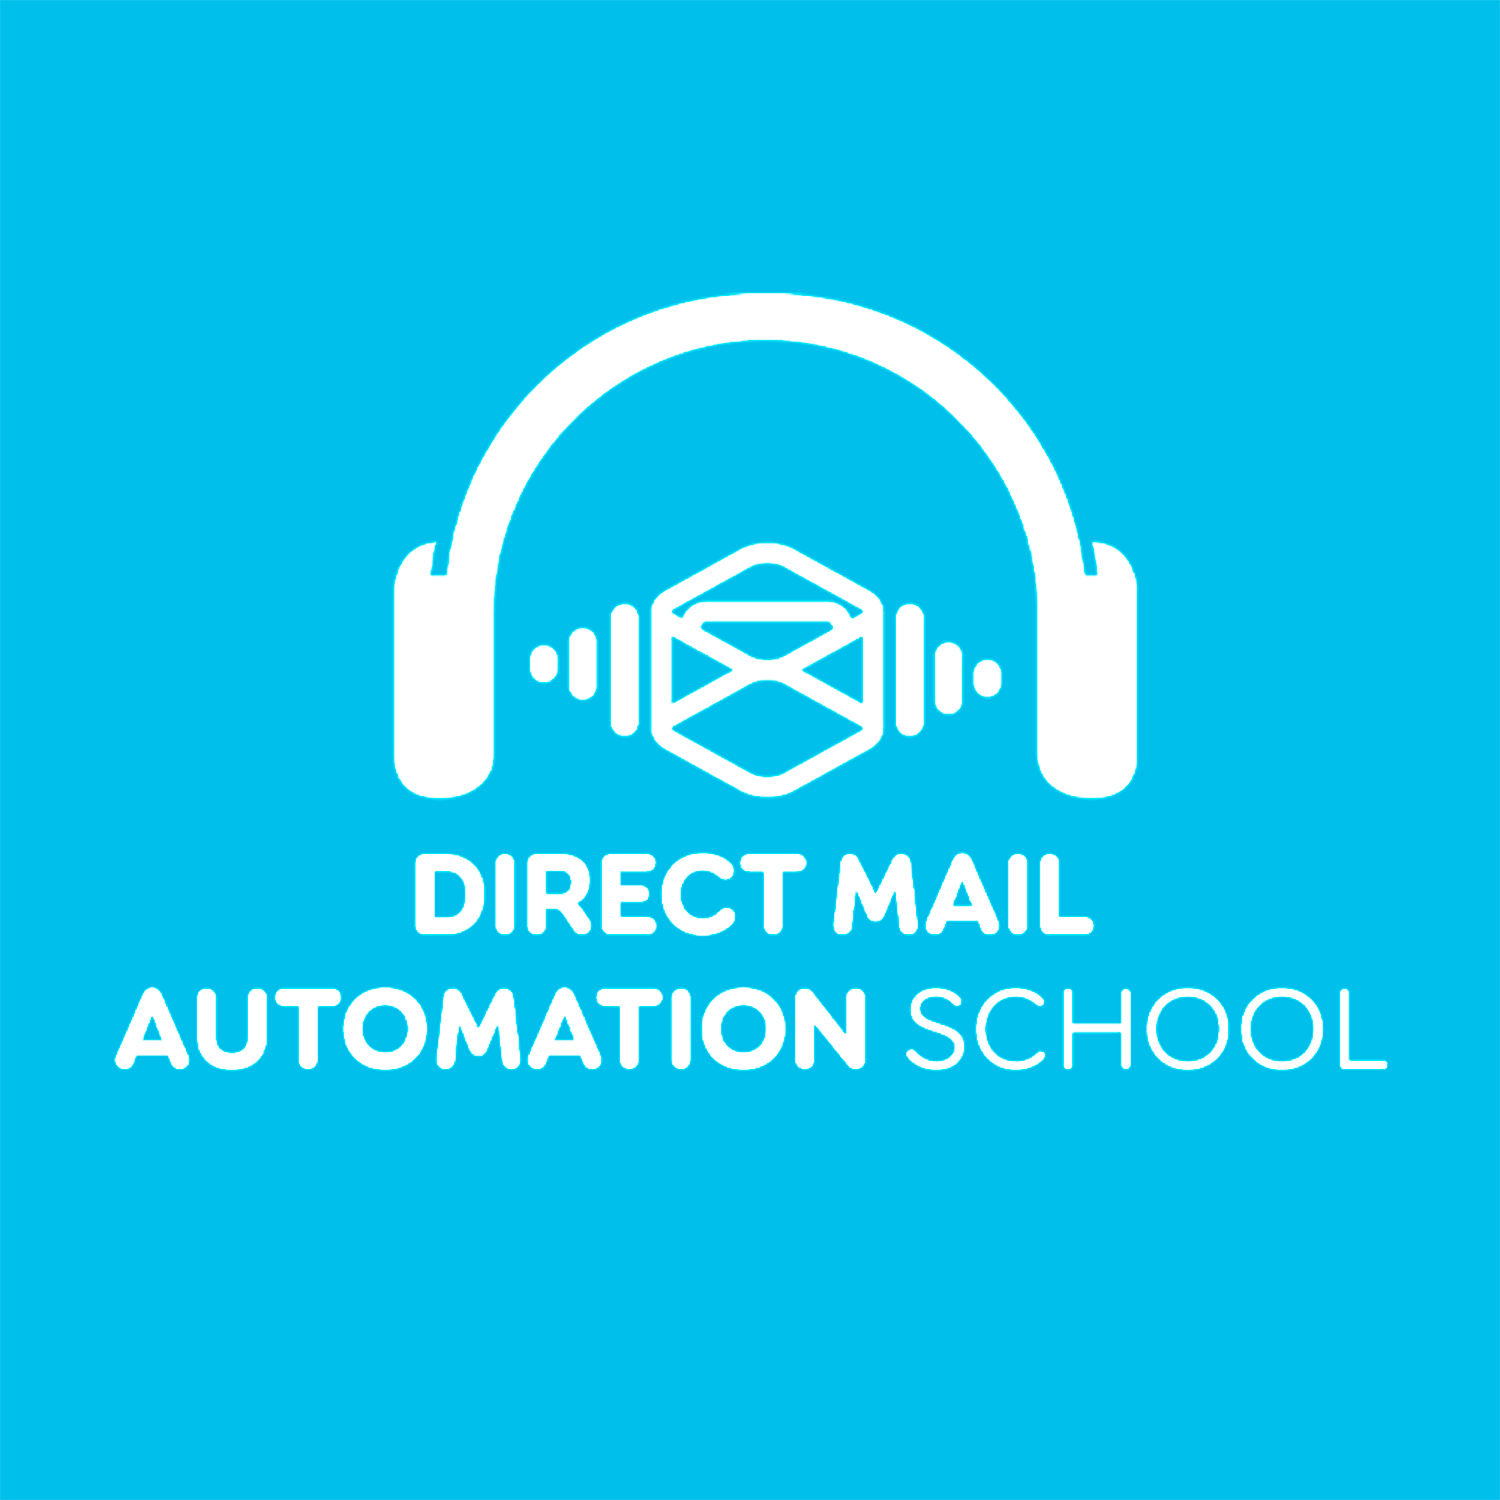 Artwork for Direct Mail Automation School